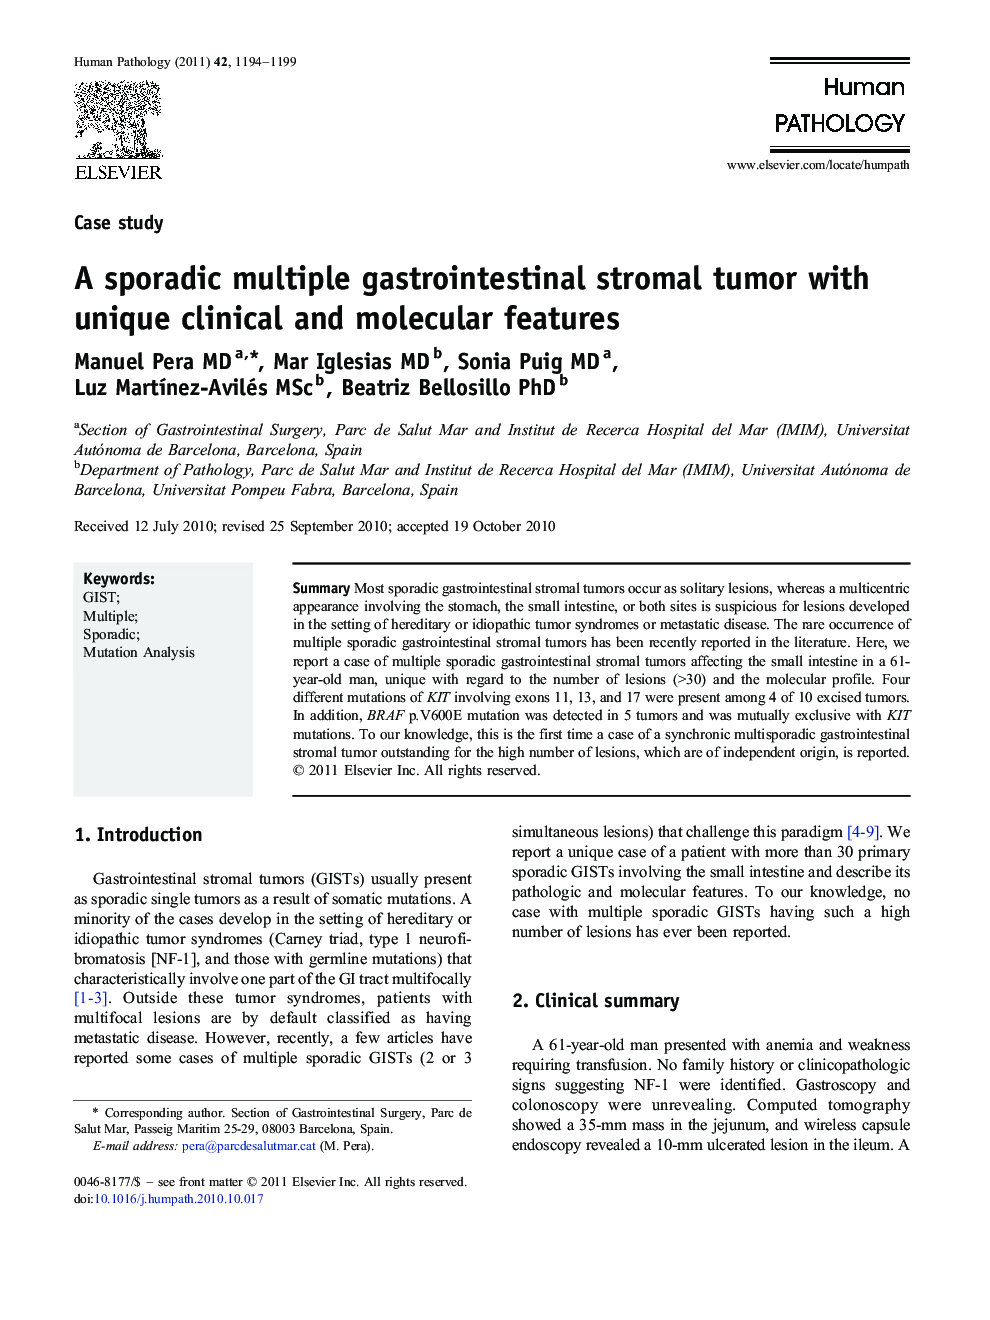 A sporadic multiple gastrointestinal stromal tumor with unique clinical and molecular features